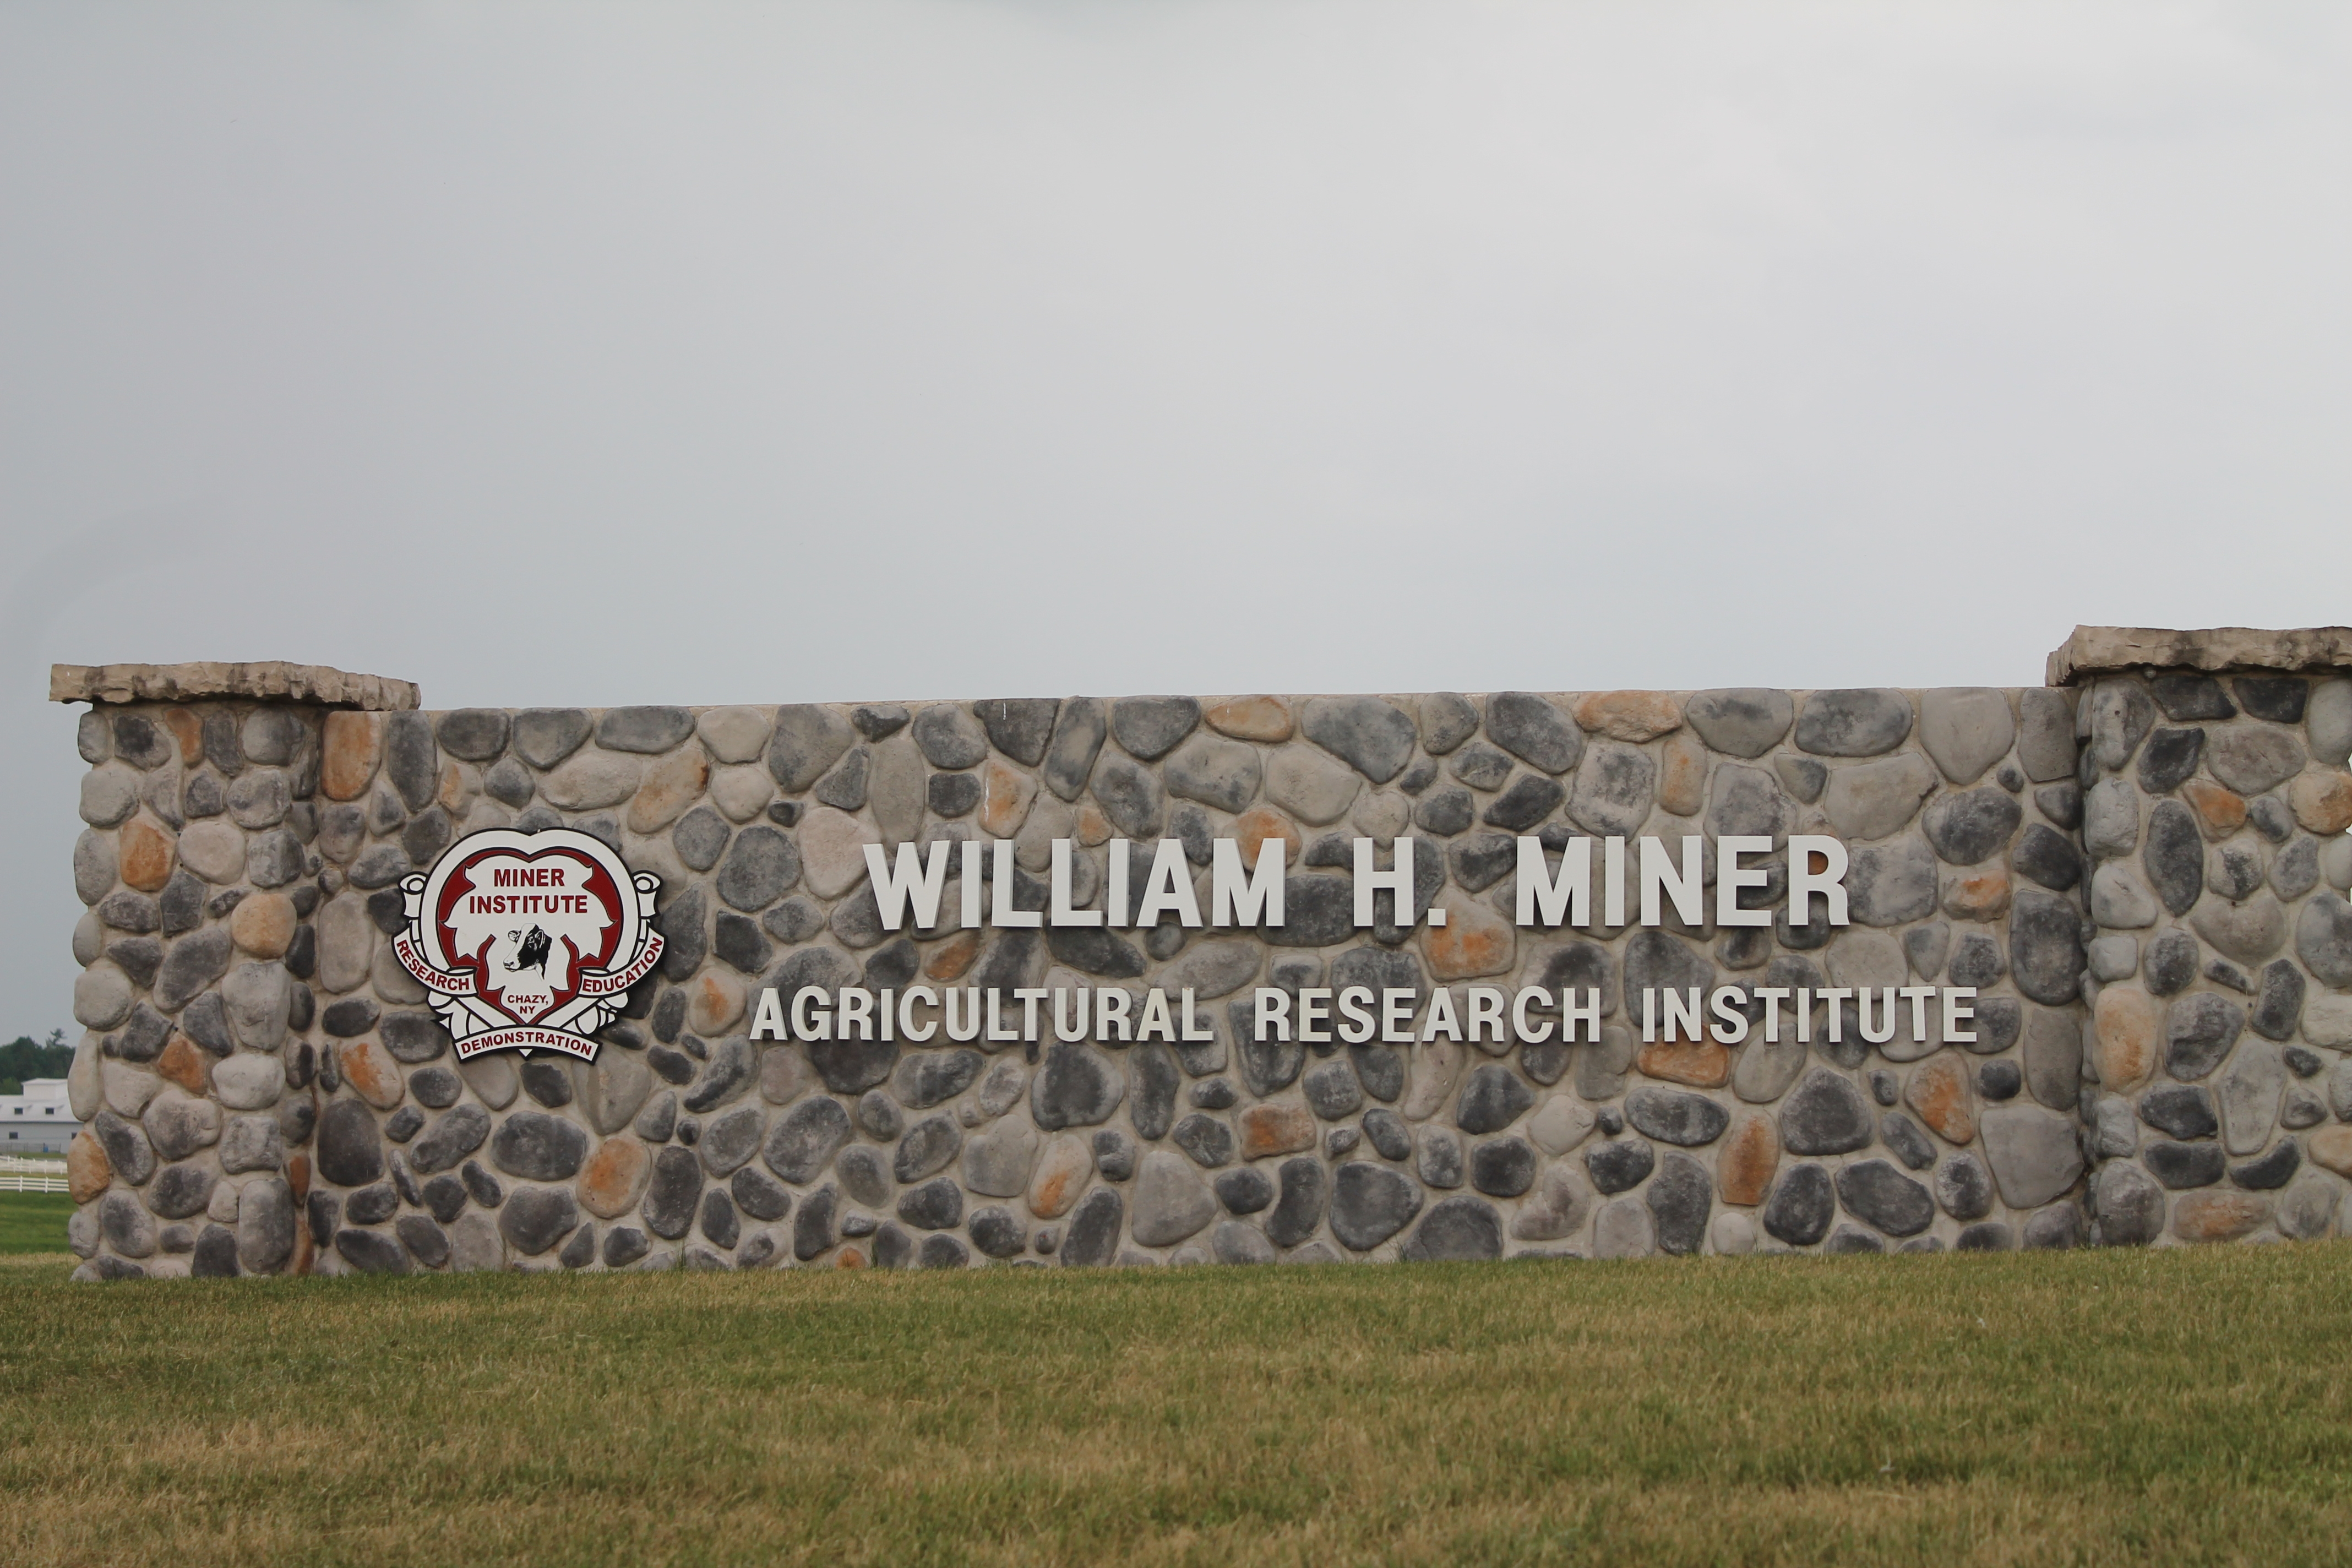 Miner Agricultural Research Institute Entrance